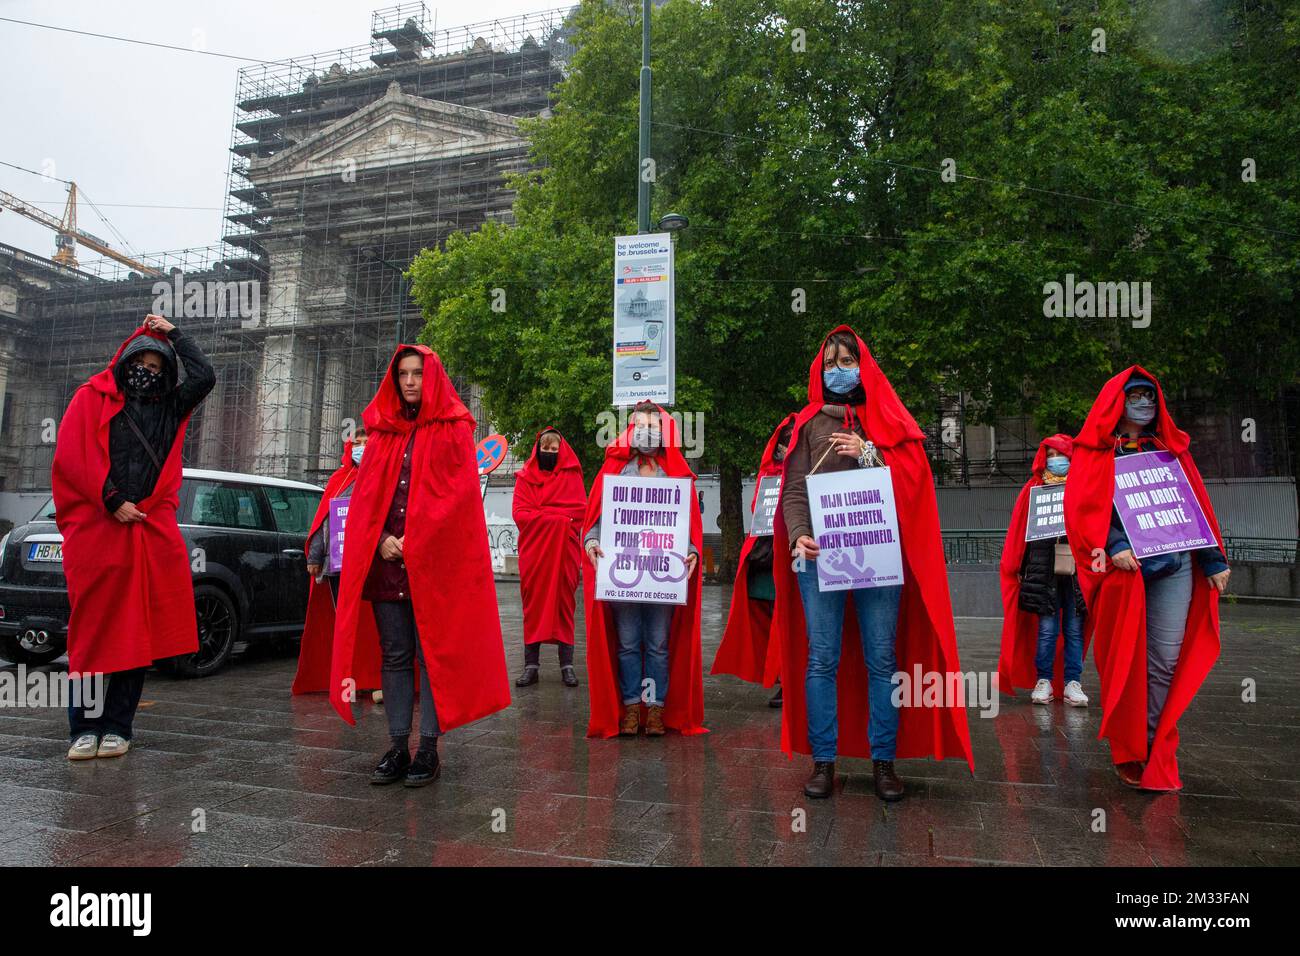 Illustration picture shows a protest action of the 'Centre d'action laique' (Centre for secular action - Centrum voor seculiere actie) on the occasion of World Abortion Right Day, Monday 28 September 2020, outside the Brussels justice palace. BELGA PHOTO NICOLAS MAETERLINCK Stock Photo